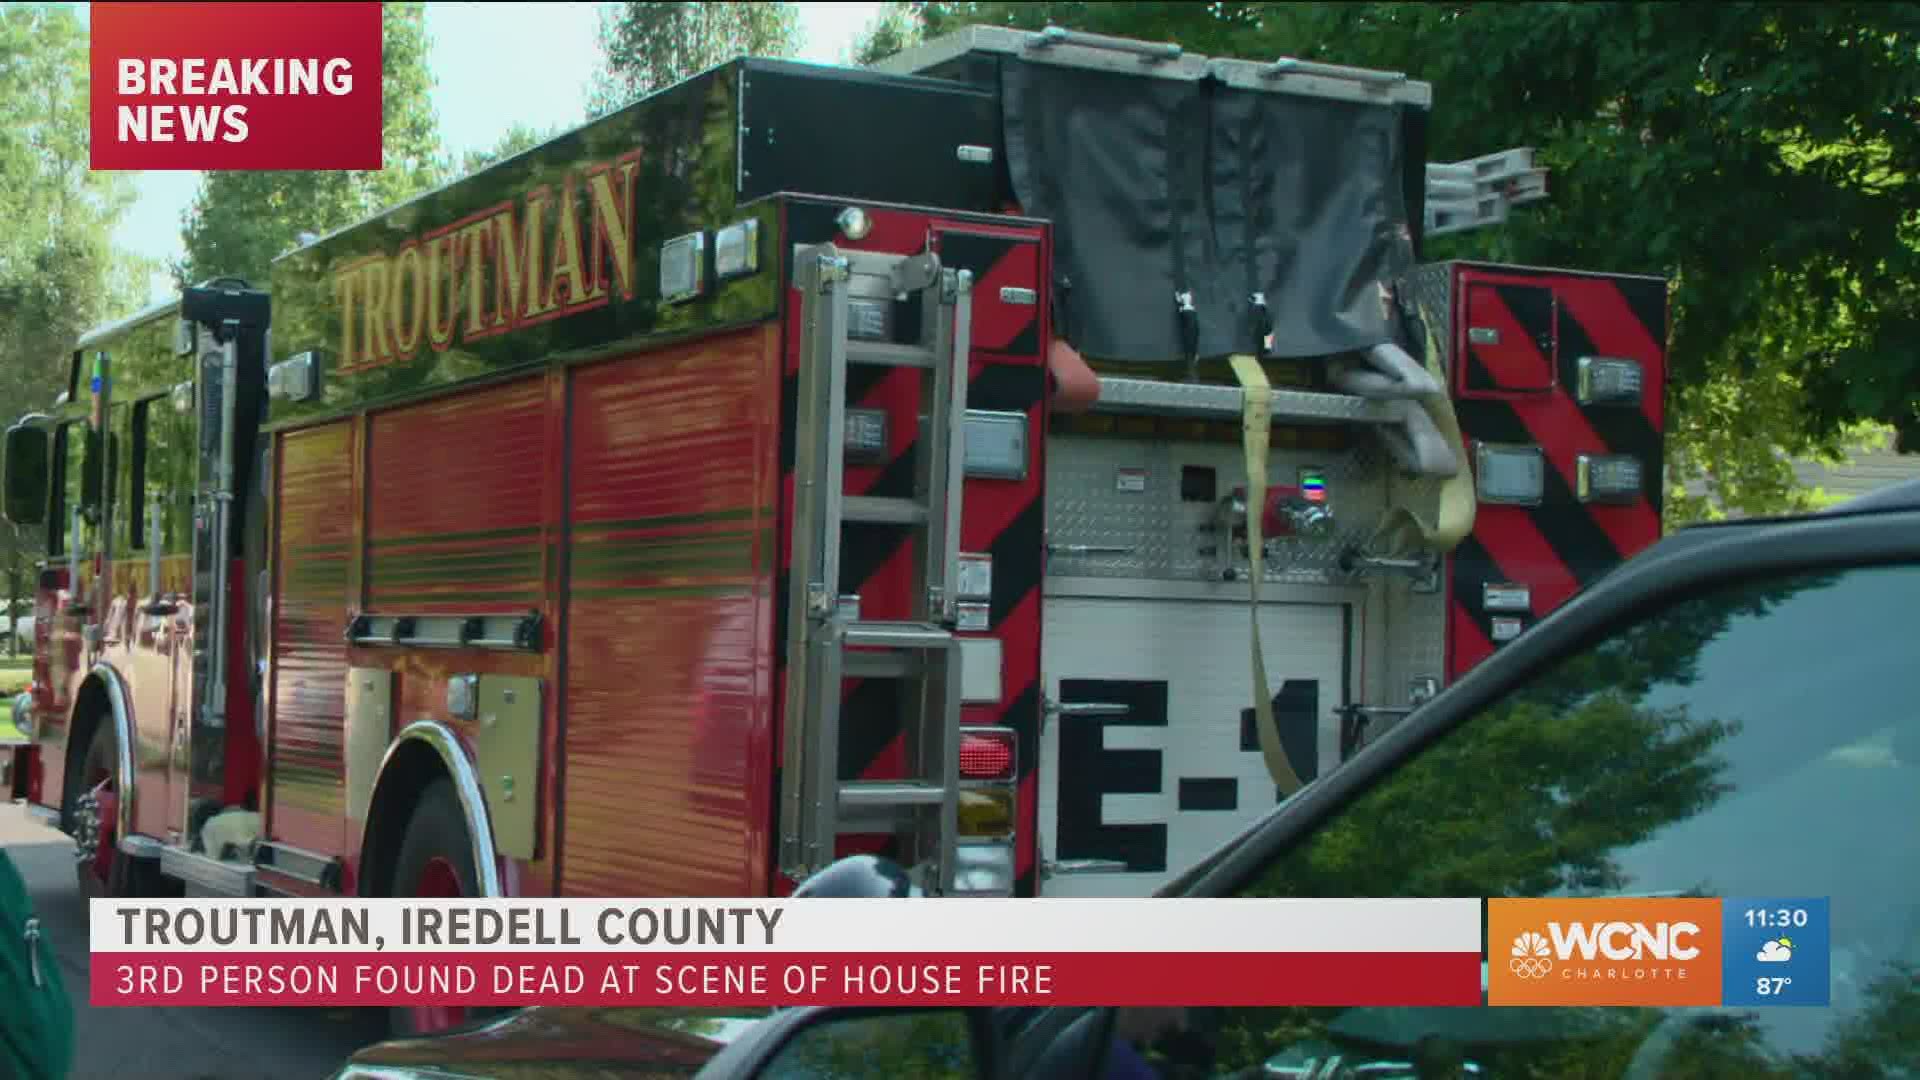 A third person was found dead at the scene of a "suspicious" house fire in Iredell County, officials said.